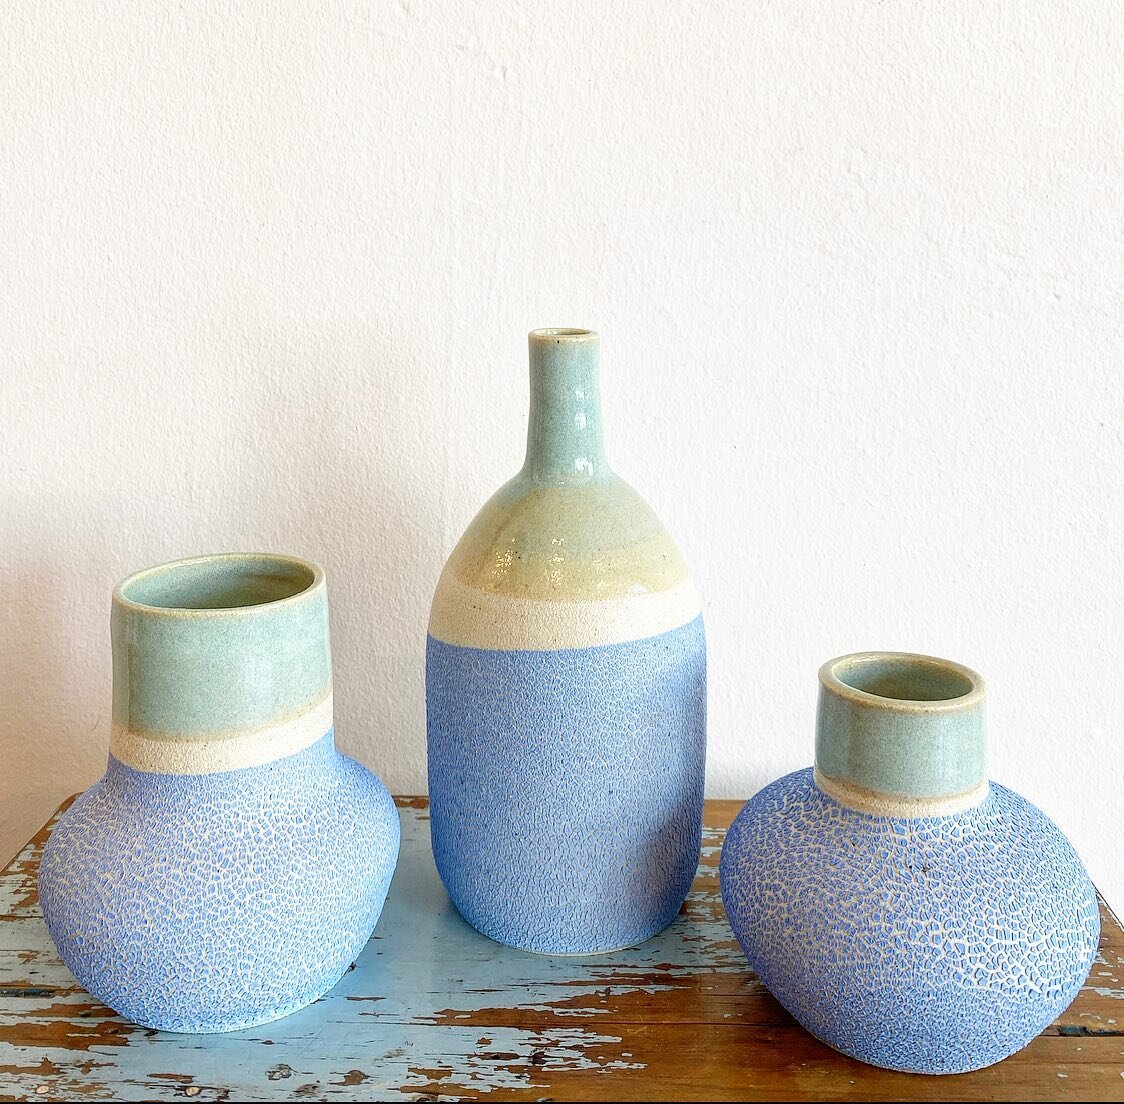 Pretty pastel pottery pieces from @clay_by_tina the textured crackle in the glaze is just gorgeous. GALLERY OPEN tomorrow 10-4 #paperpear #waggawagga #handmade #australianmade #ceramics